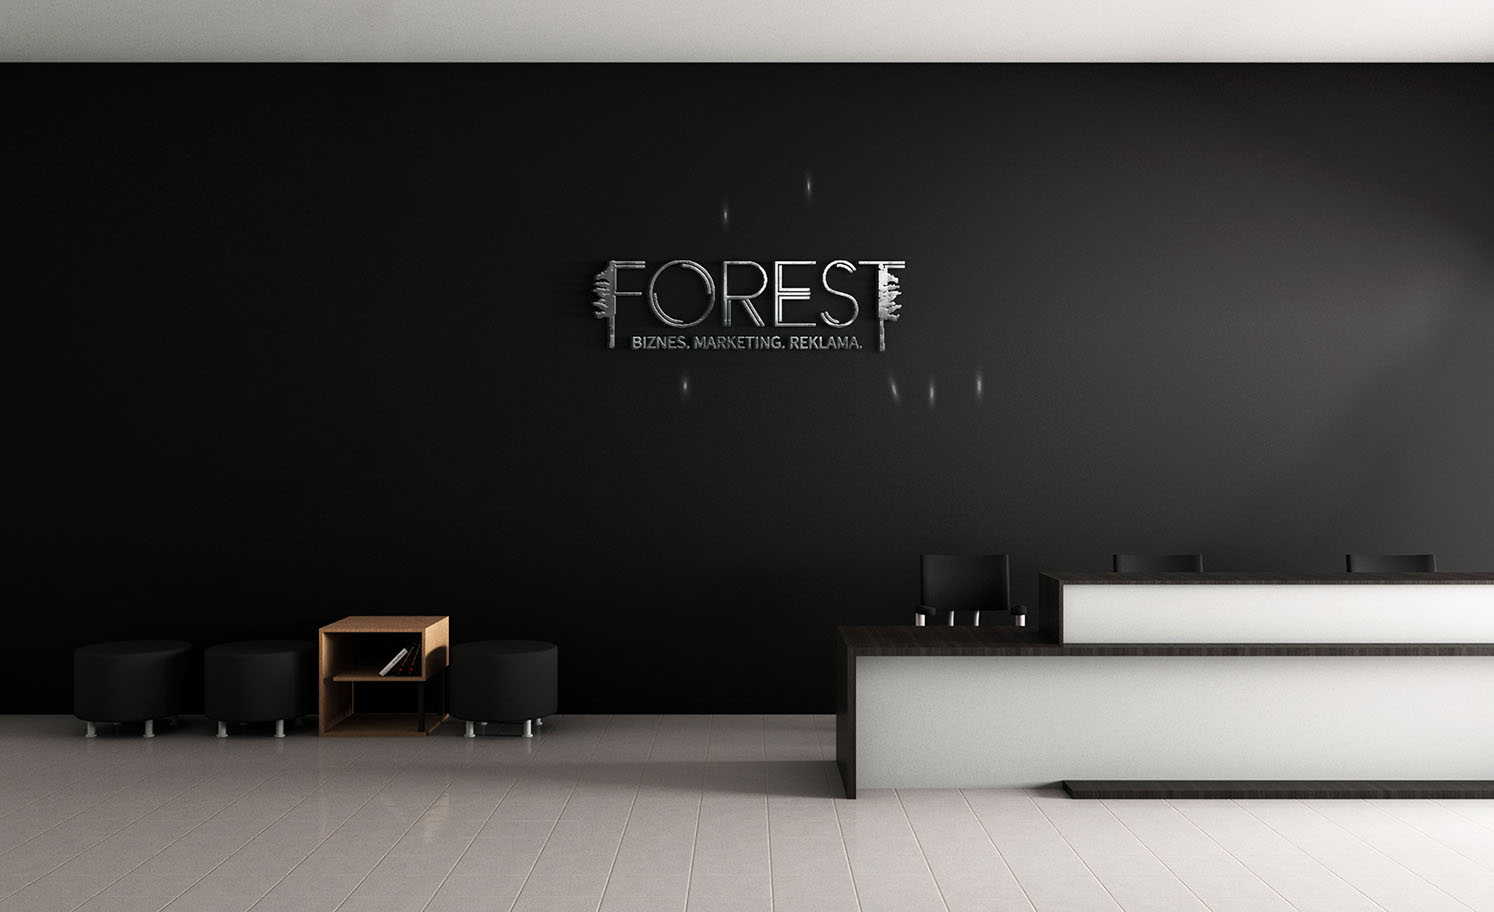 5forest